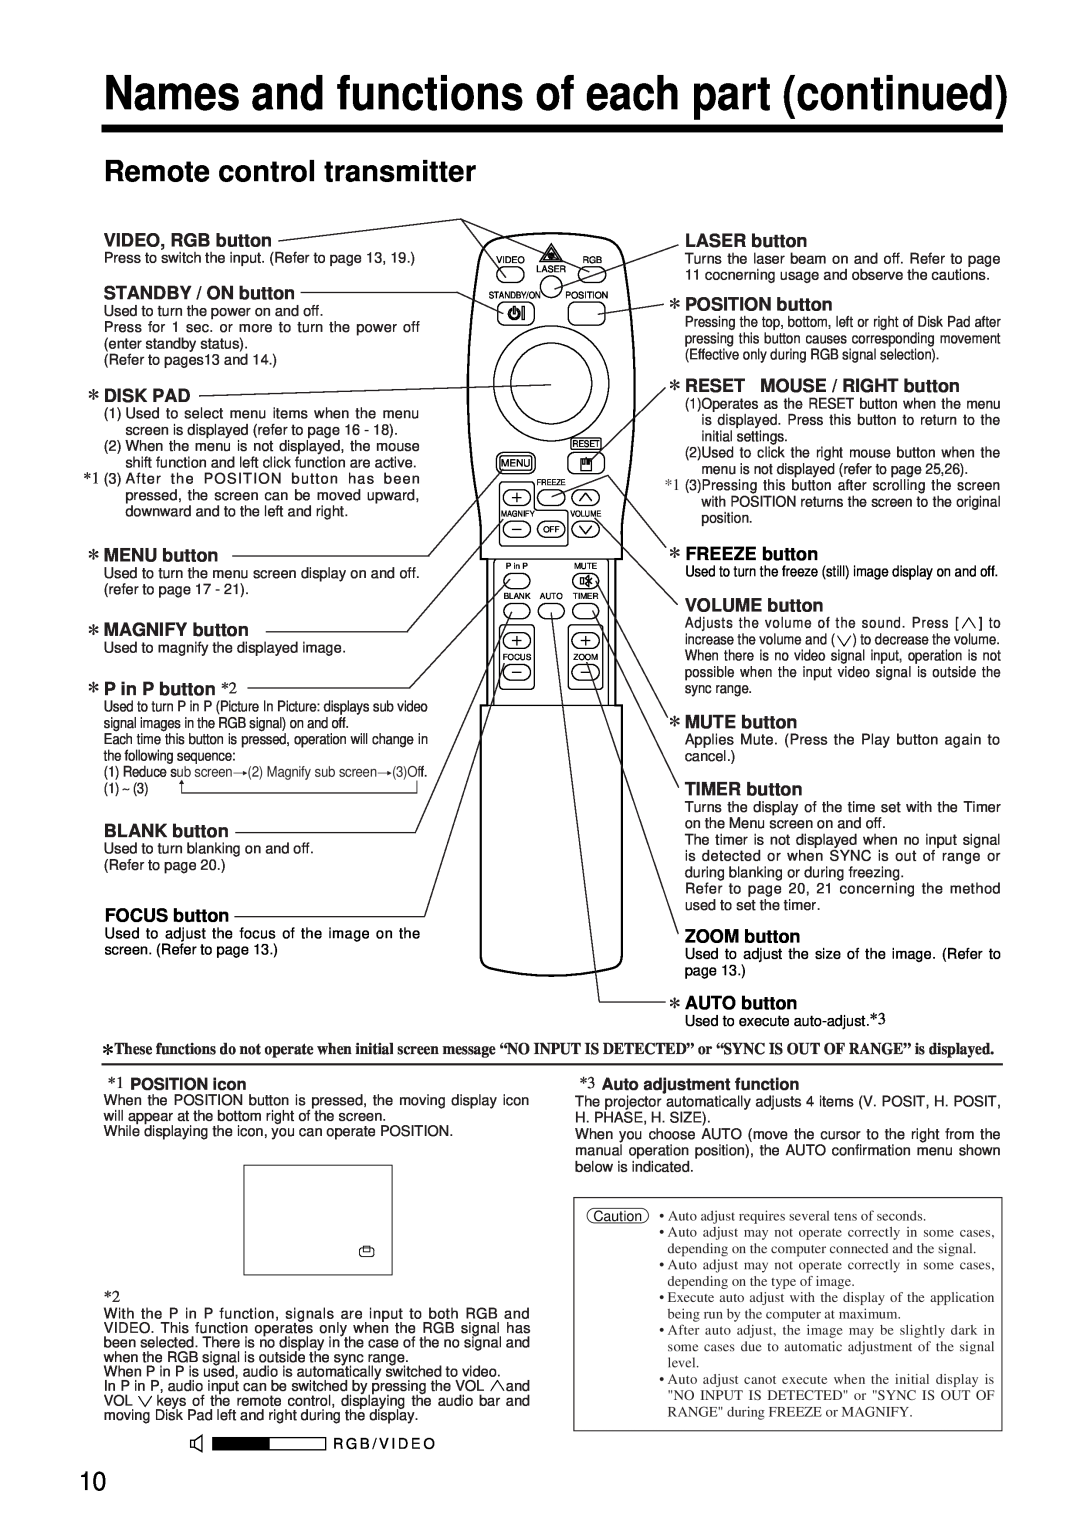 Hitachi CP-X960W user manual Remote control transmitter, Names and functions of each part continued 